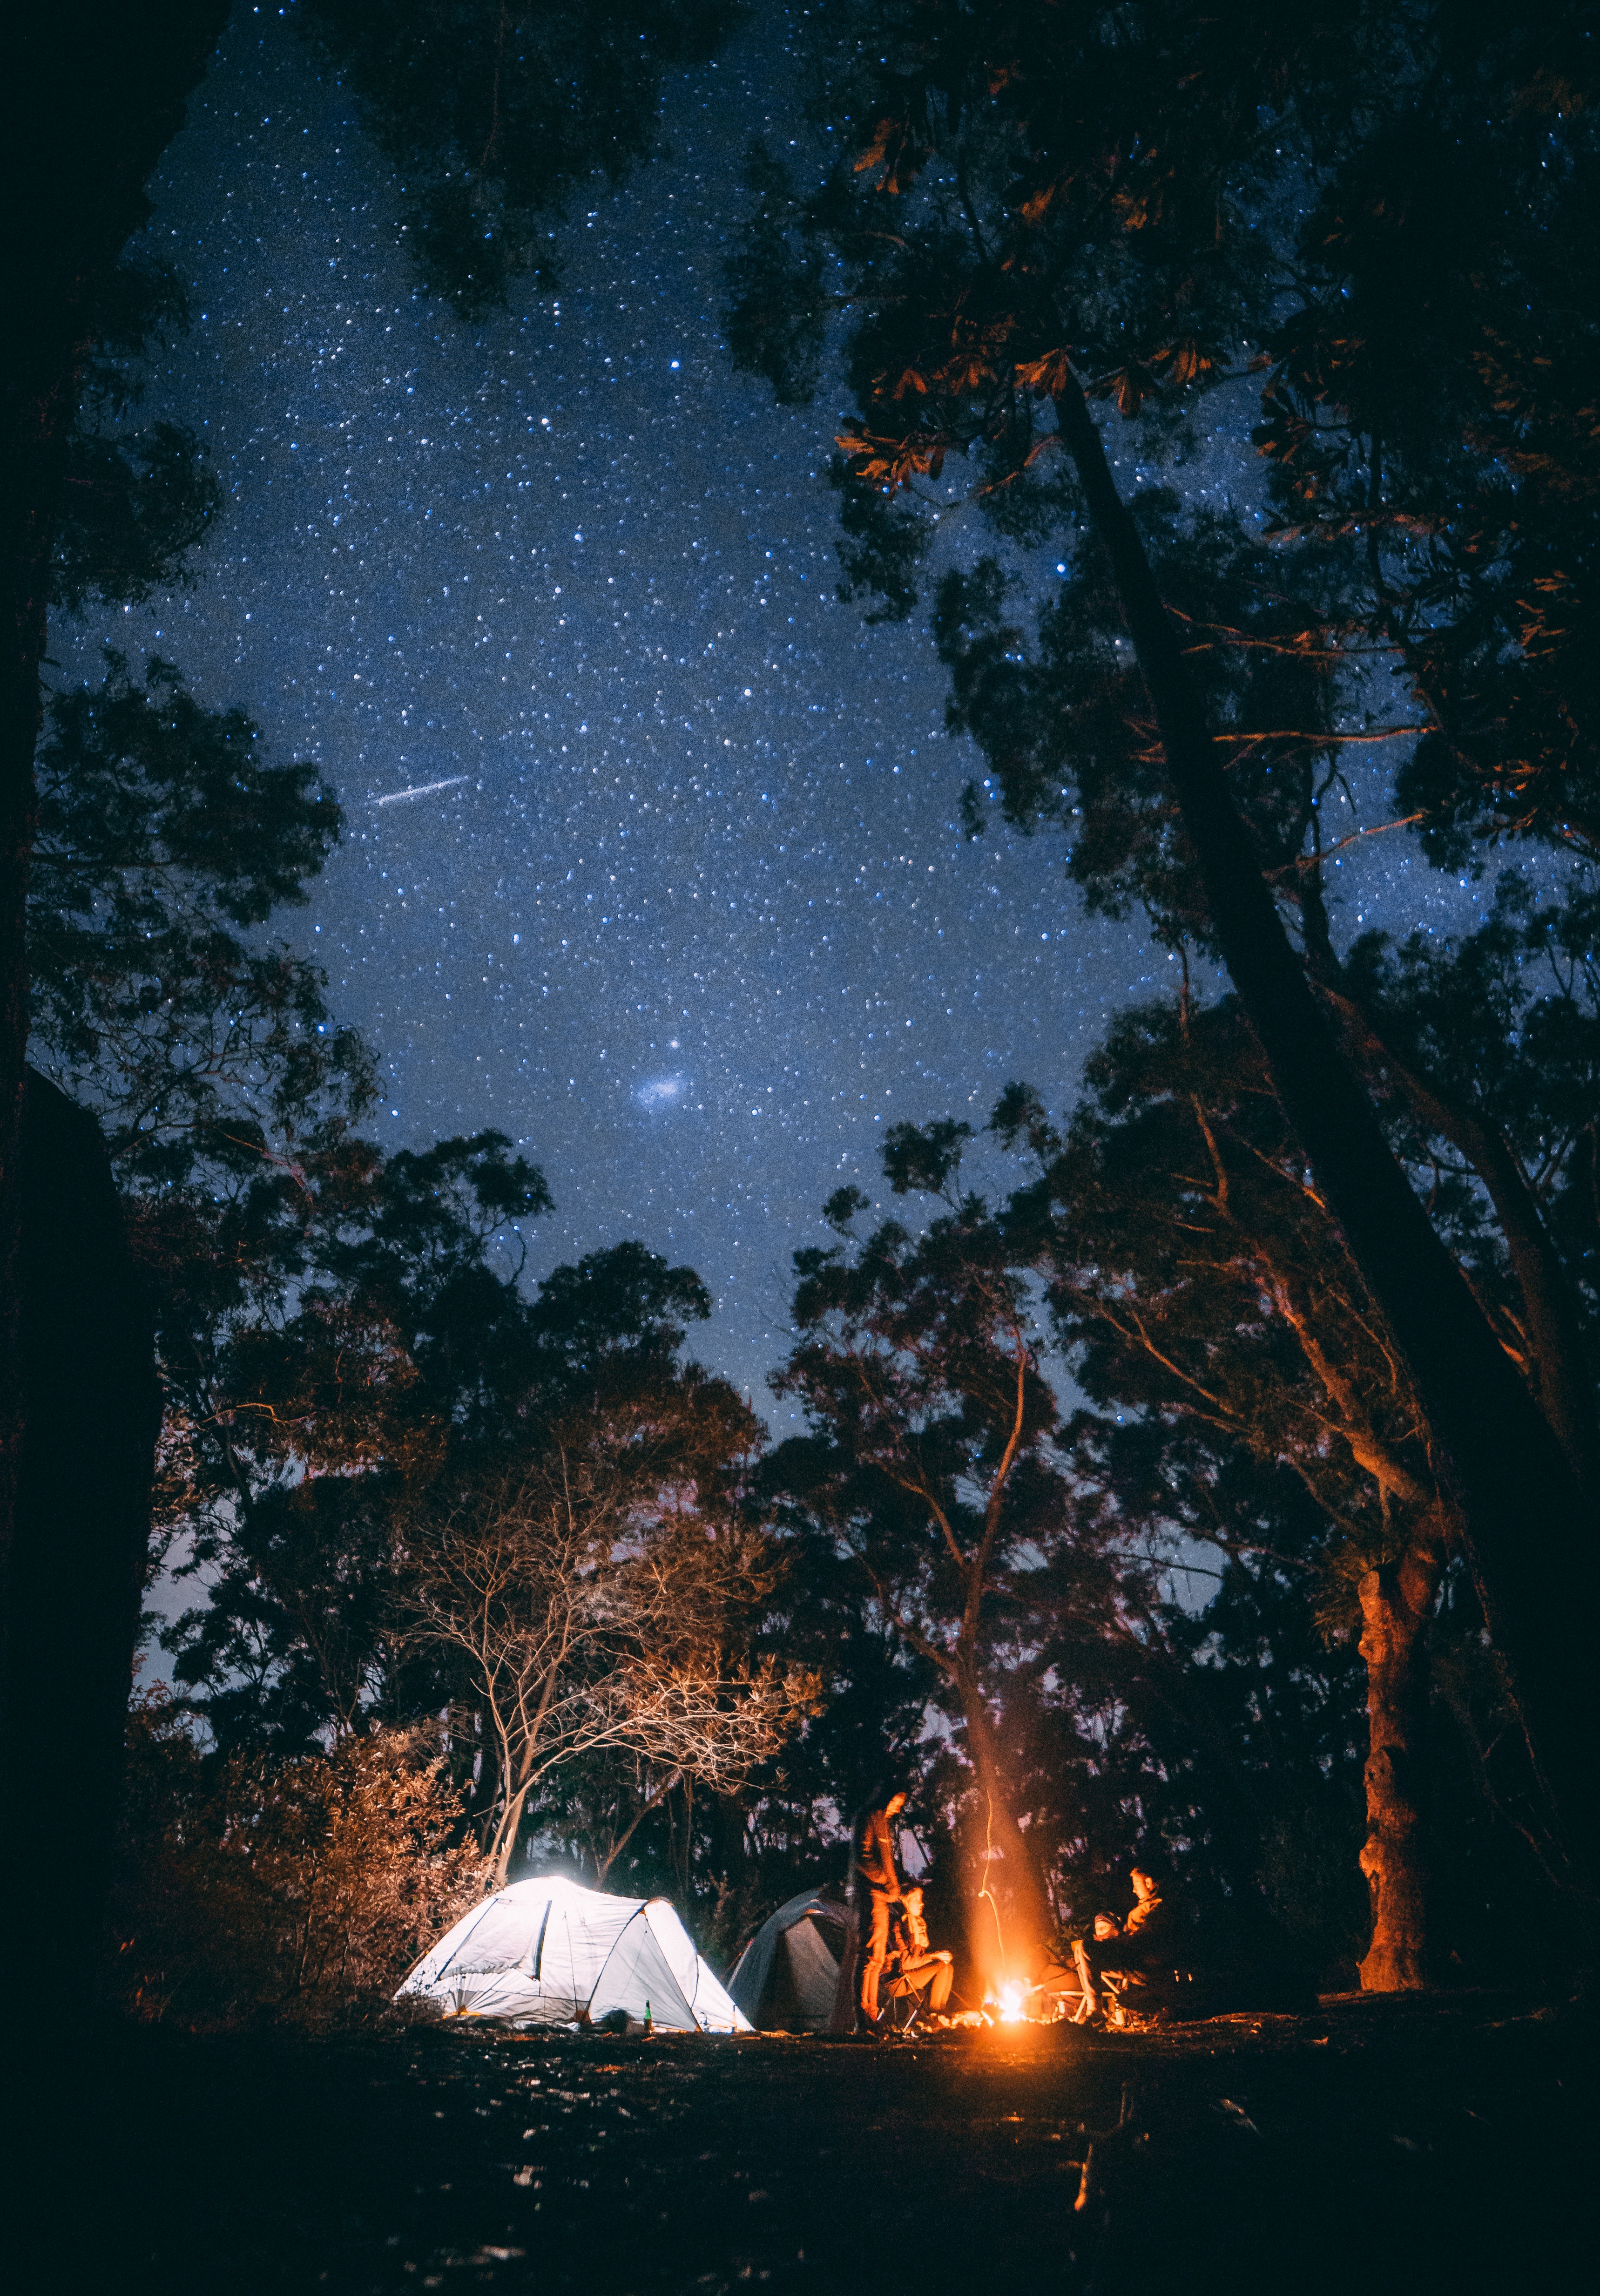 bonfire, nature, trees, forest, starry sky, relaxation, rest, tent, camping, campsite